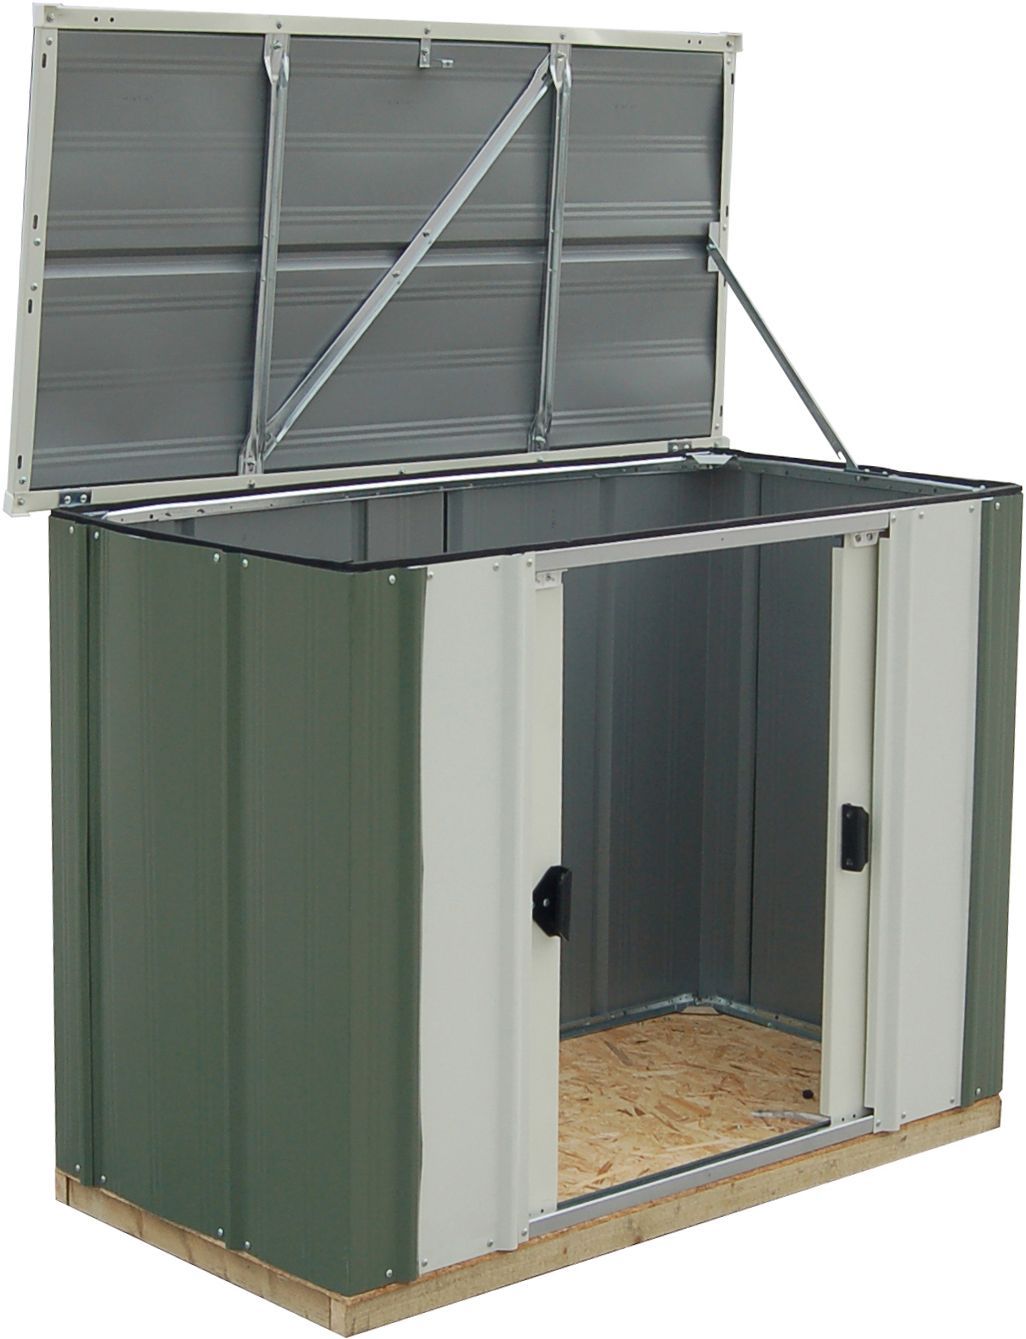 Arrow 4x2 Pent Shed - Base not includedAssembly service included